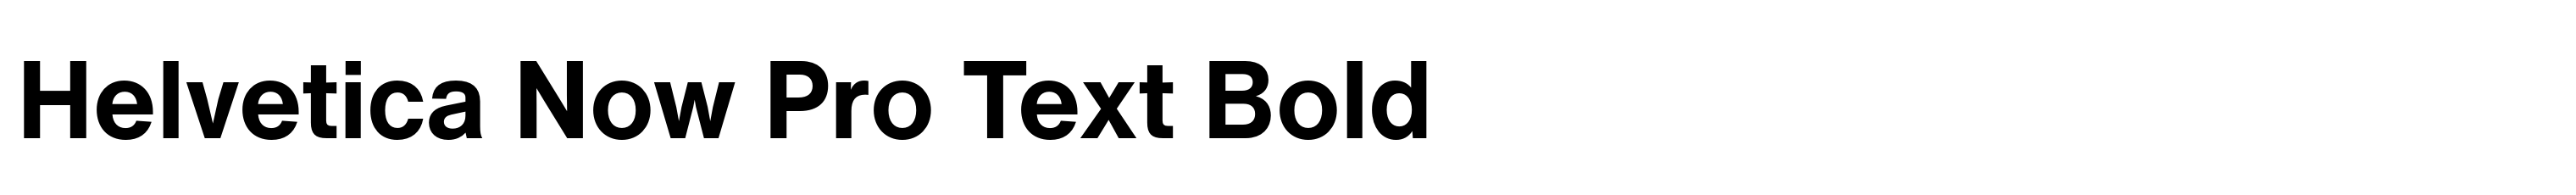 Helvetica Now Pro Text Bold